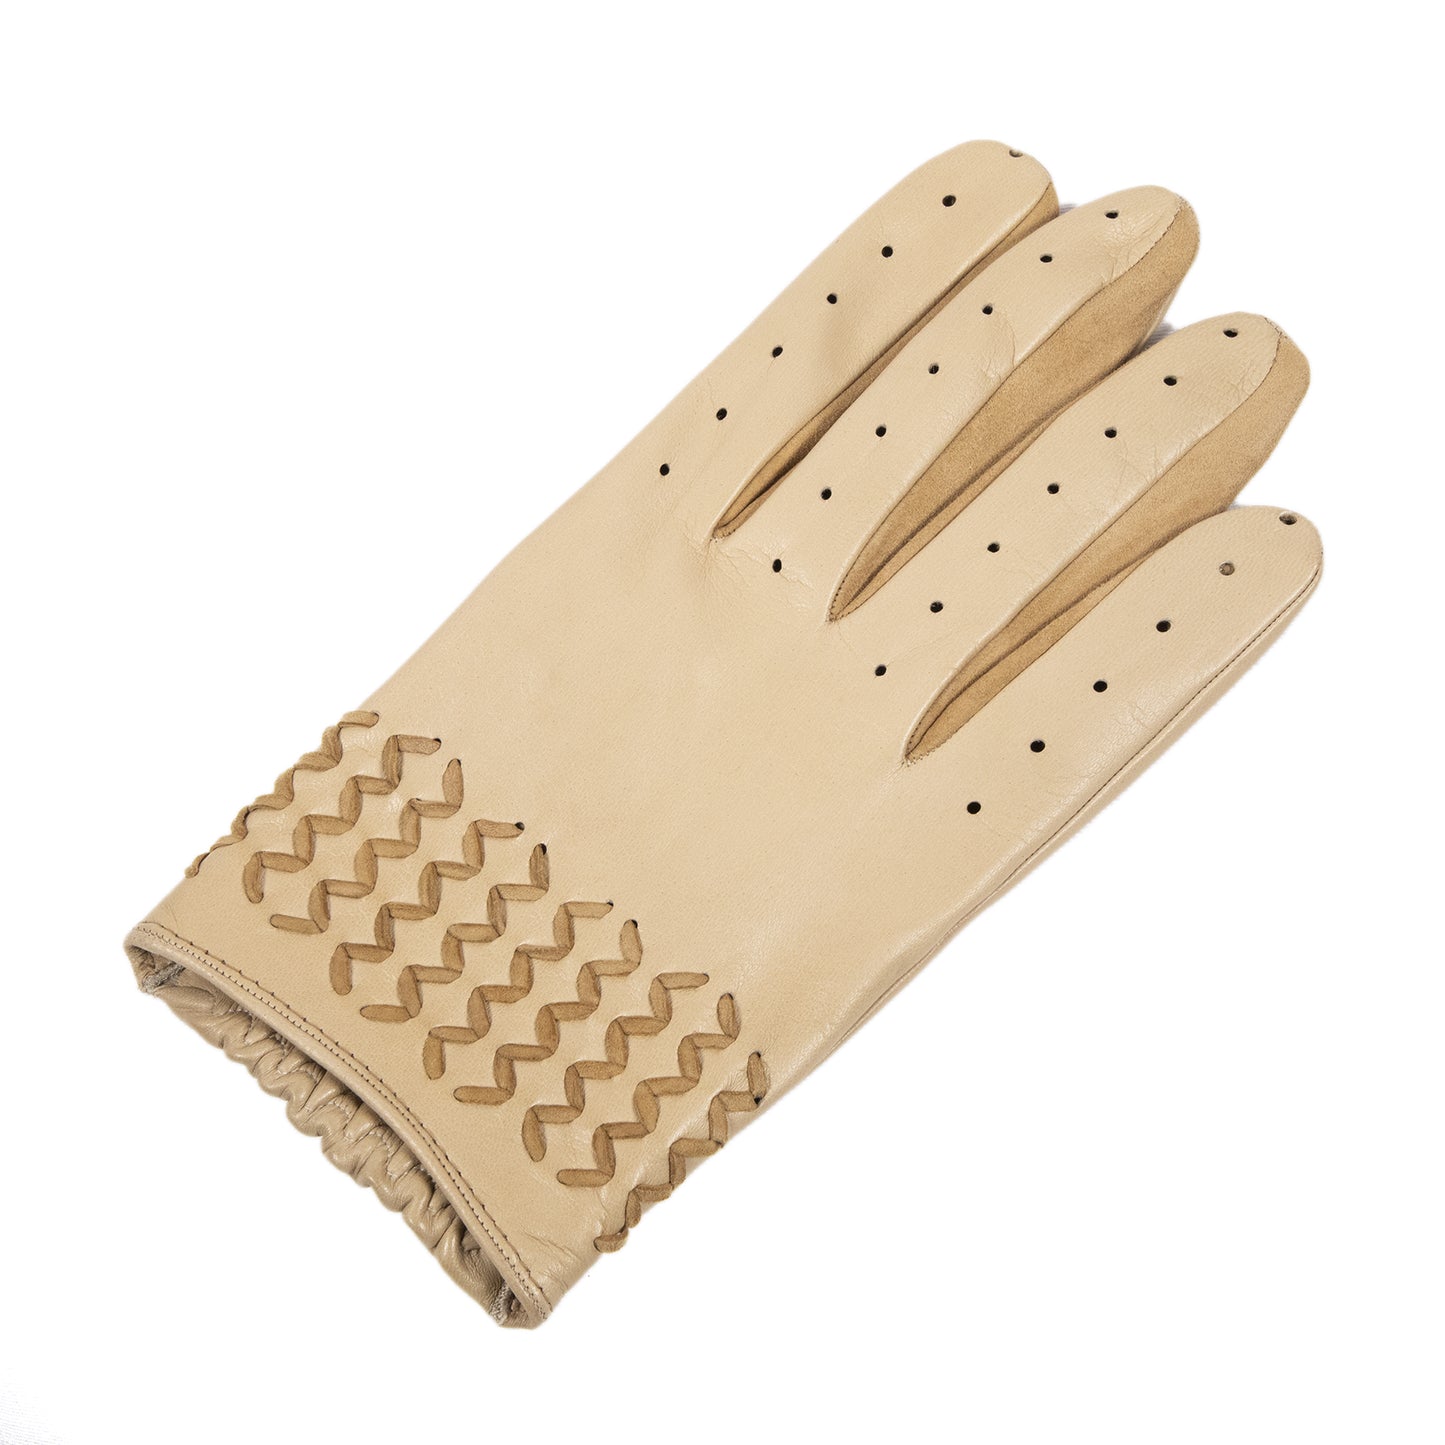 Men’s unlined nappa leather gloves with tonal suede woven details on top